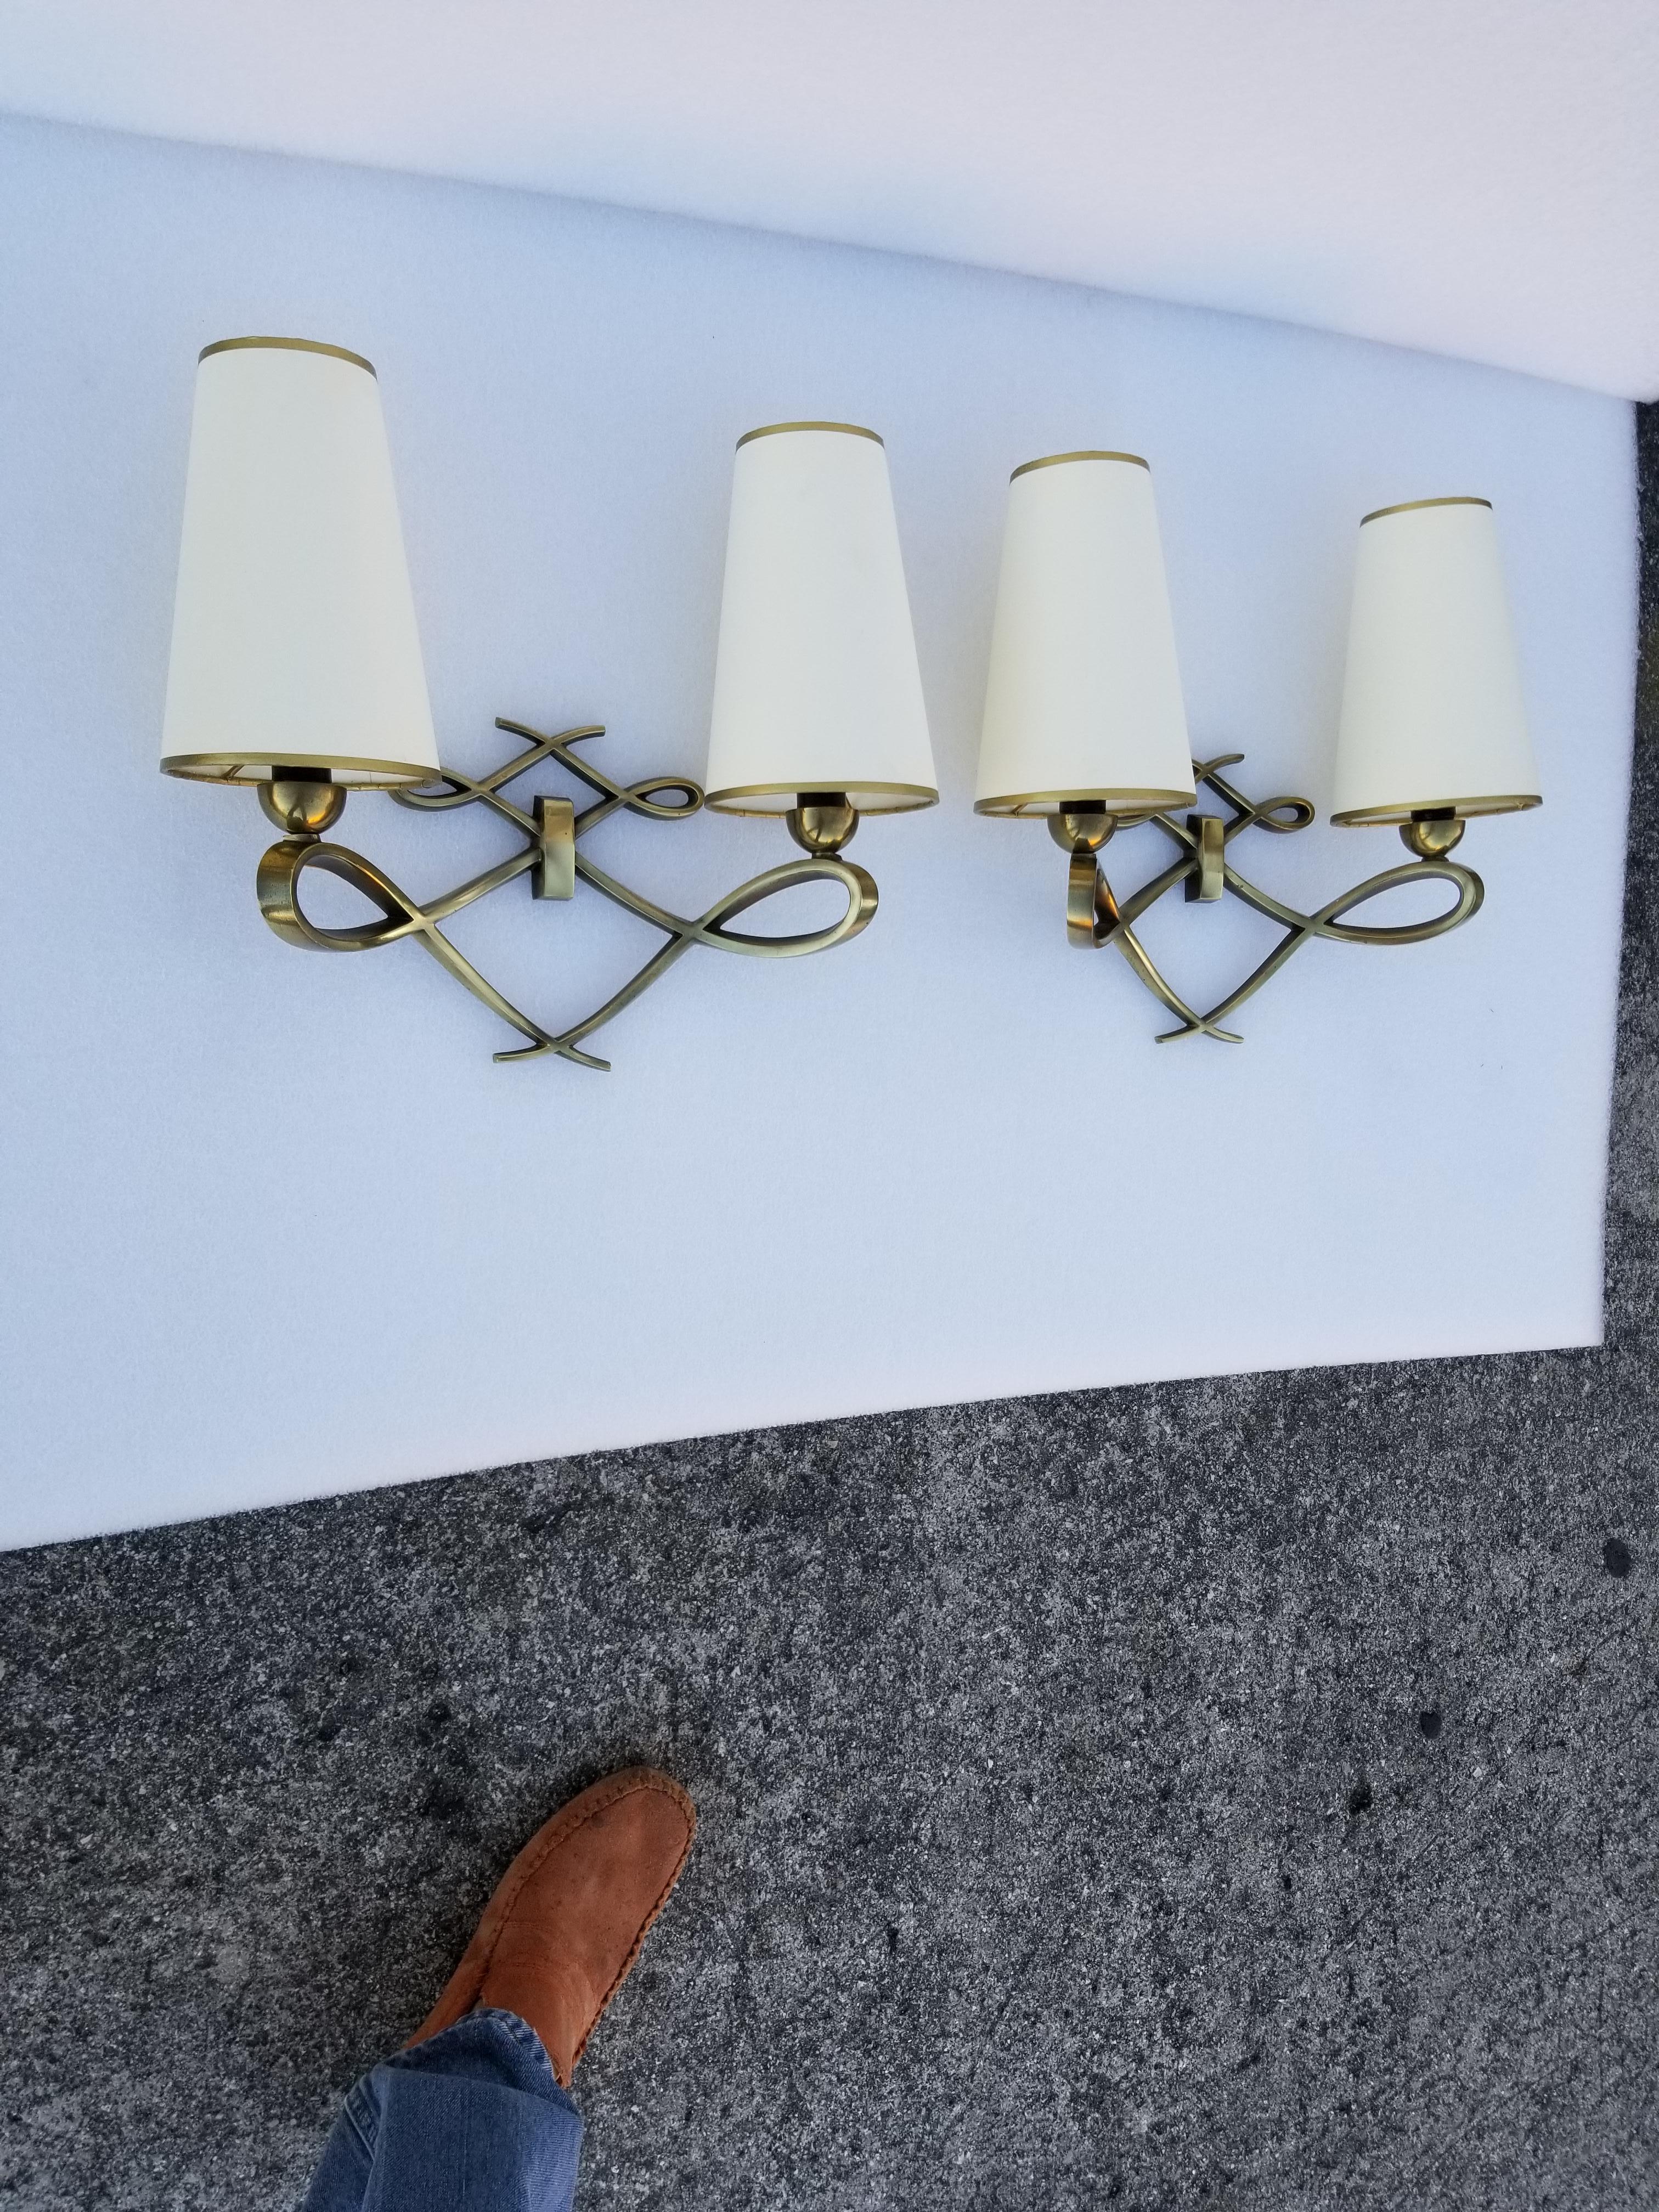 Superb pair of Maison Arlus 2 light sconces, exceptional, 8 pairs Available 
US rewired and in working condition
Custom backplate available
New shades, identical to the  vintage original.